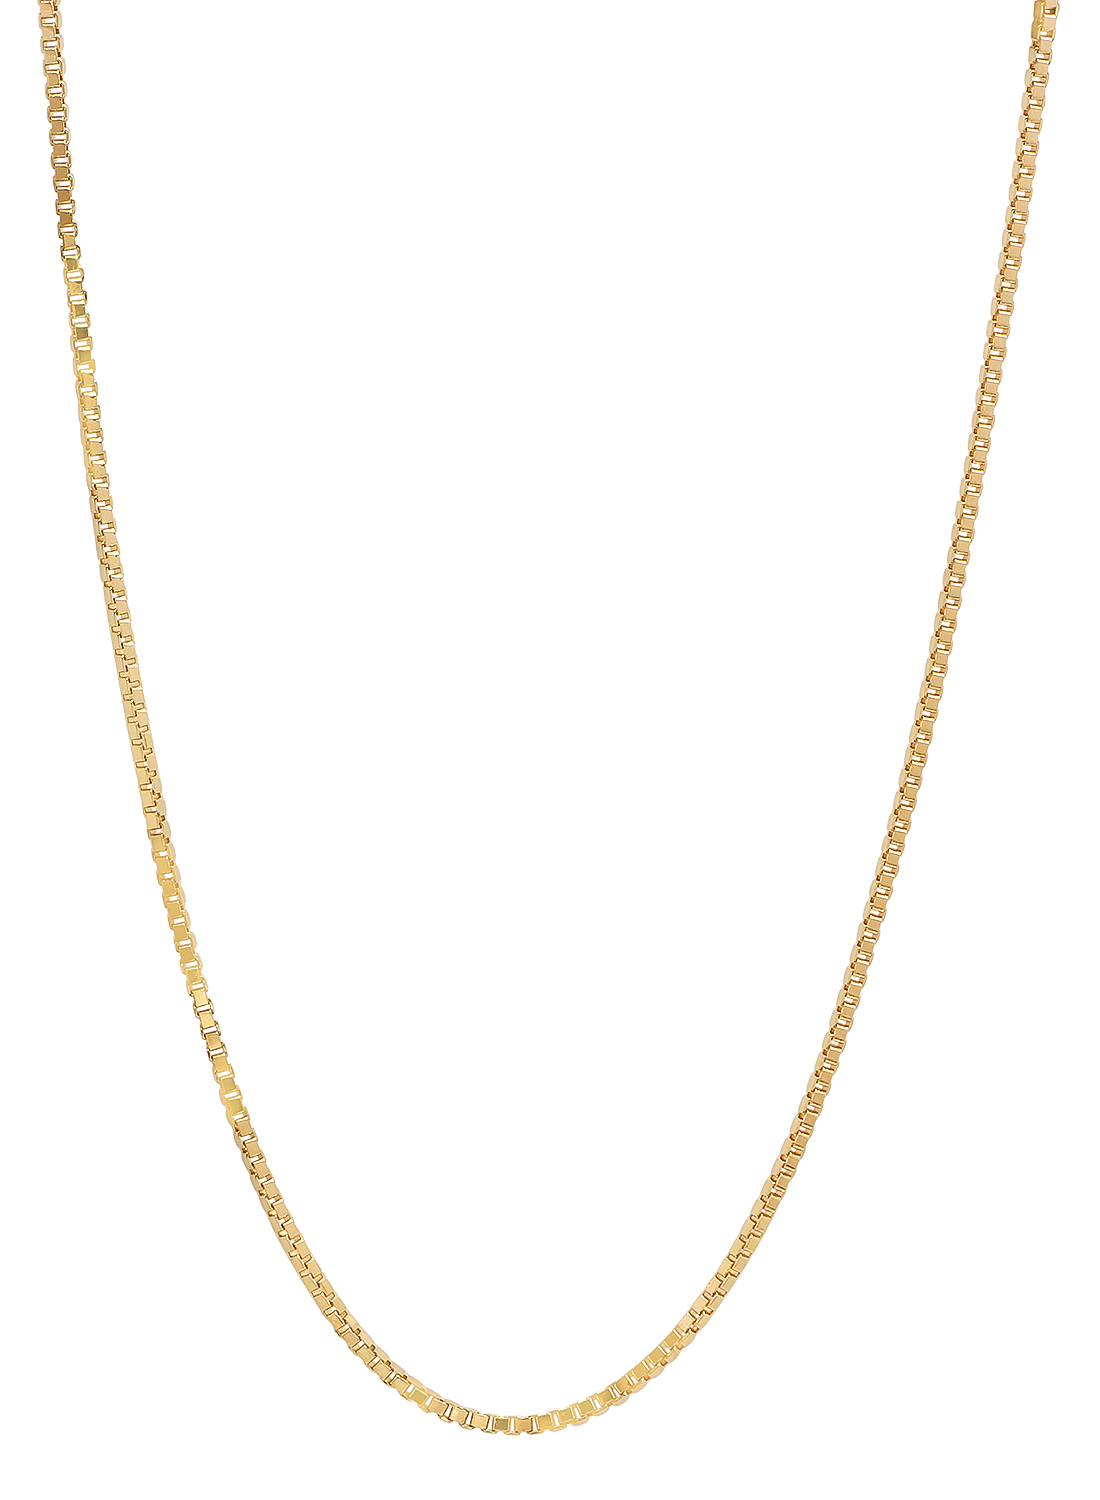 7-30 6 microns 24k Yellow Gold Plated Cable Chain Necklace Jewelry Cloth /& Pouch The Bling Factory 3mm High-Polished 0.25 mils